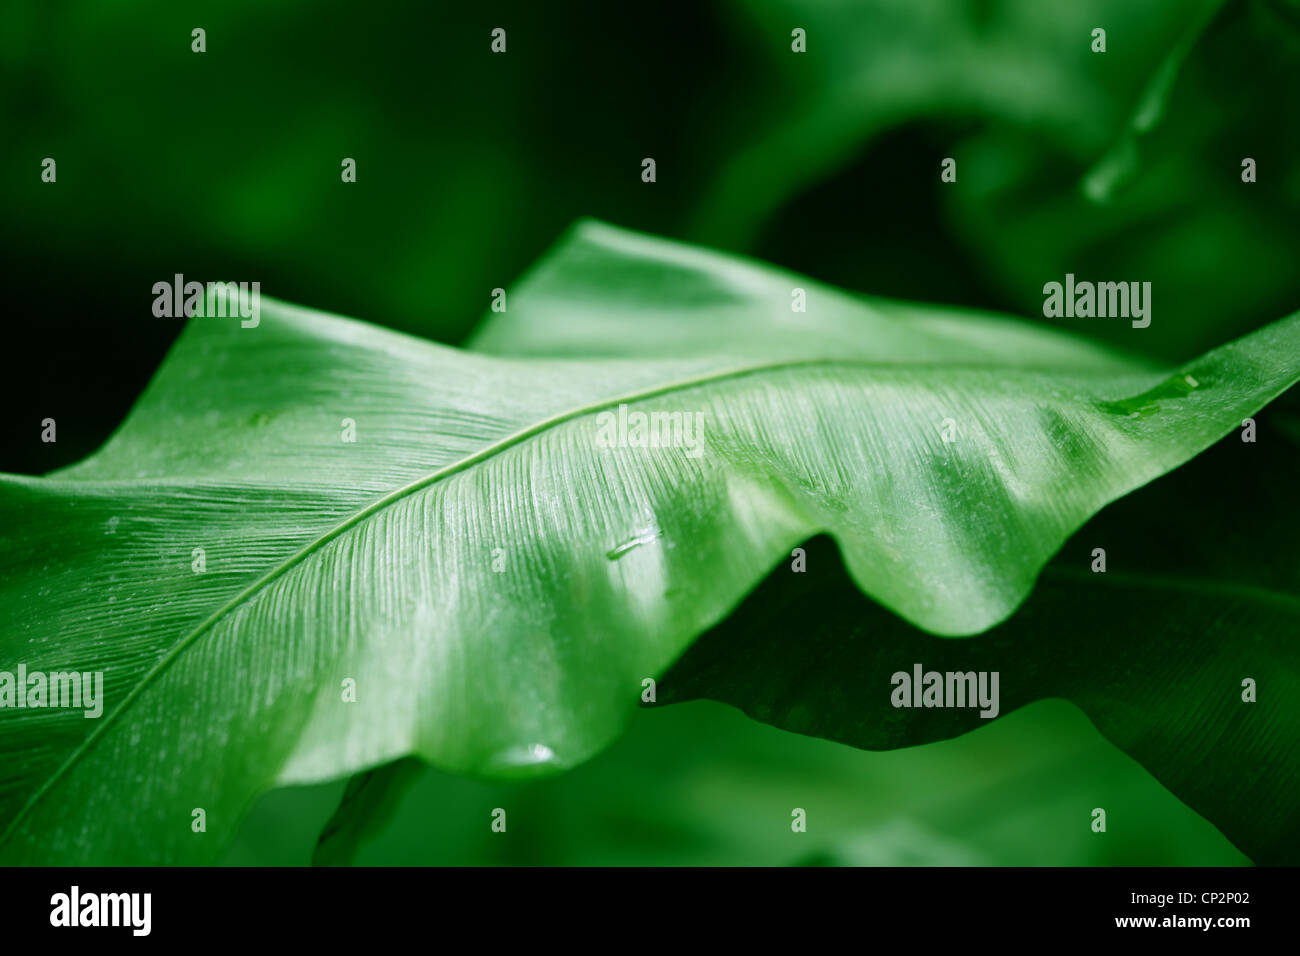 Tropical palm plant, green thick leaves Stock Photo